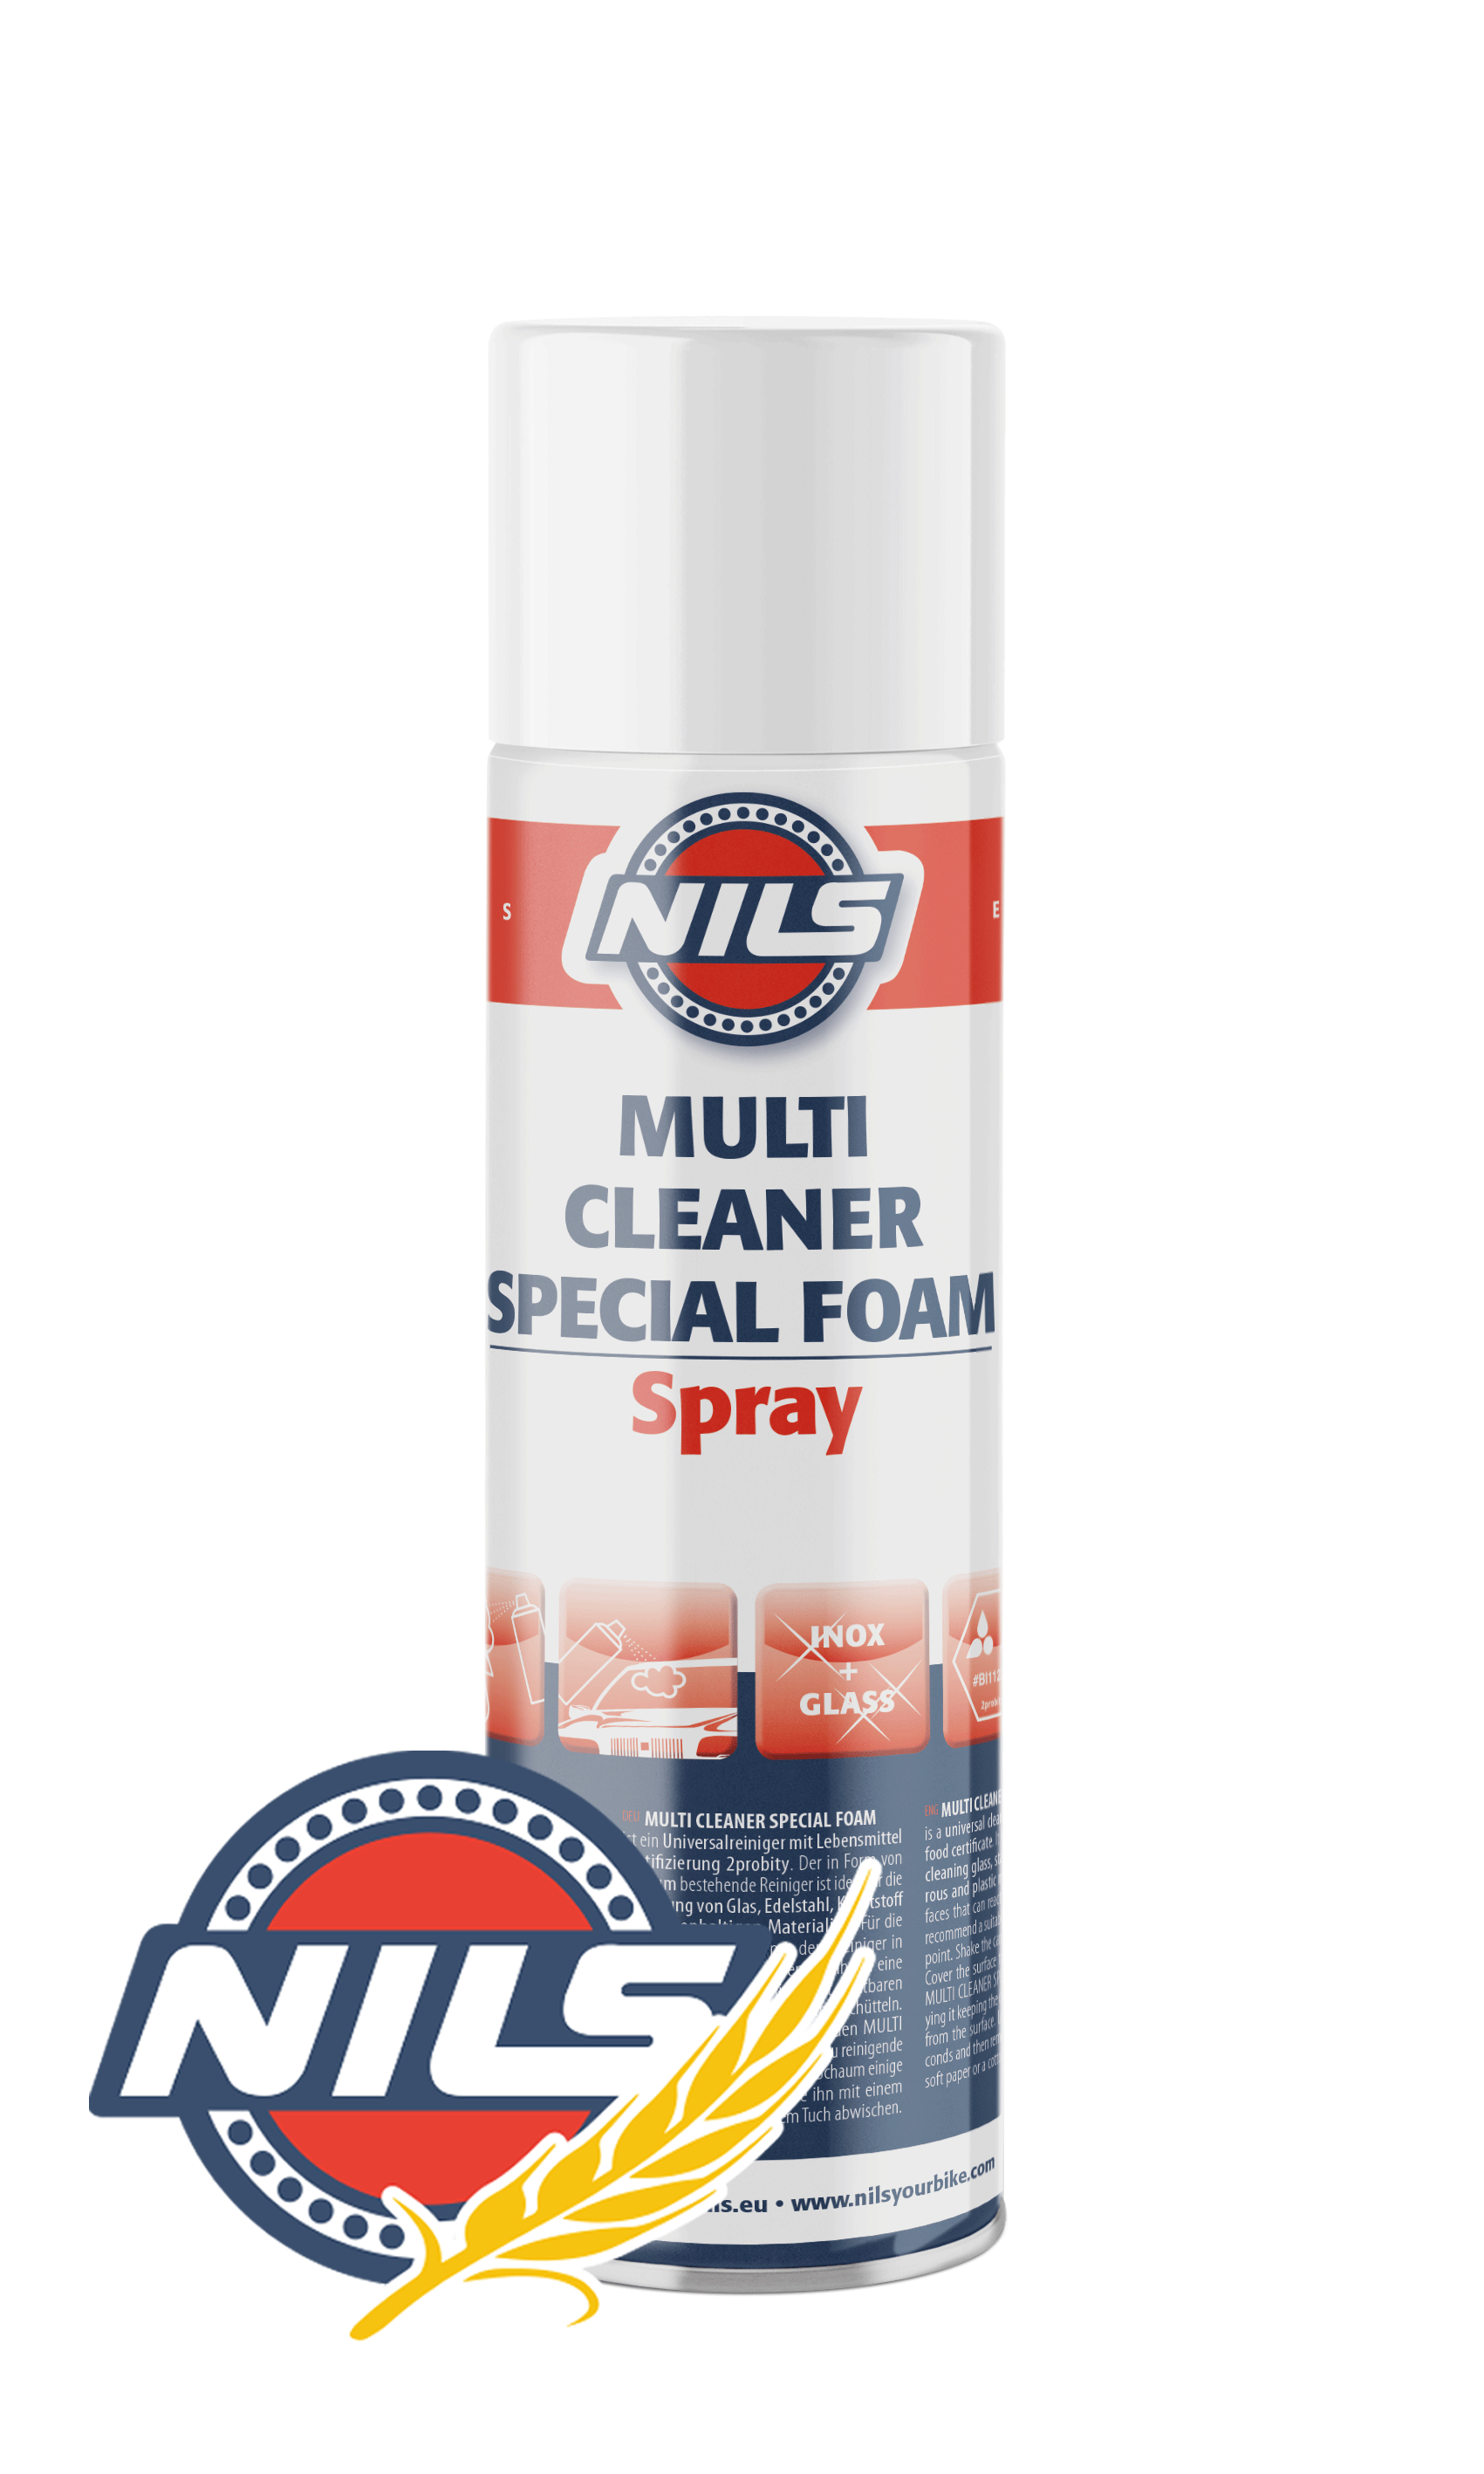 MULTI CLEANER SPECIAL FOAM SPRAY - NILS - EXPERTS IN LUBRICANTS